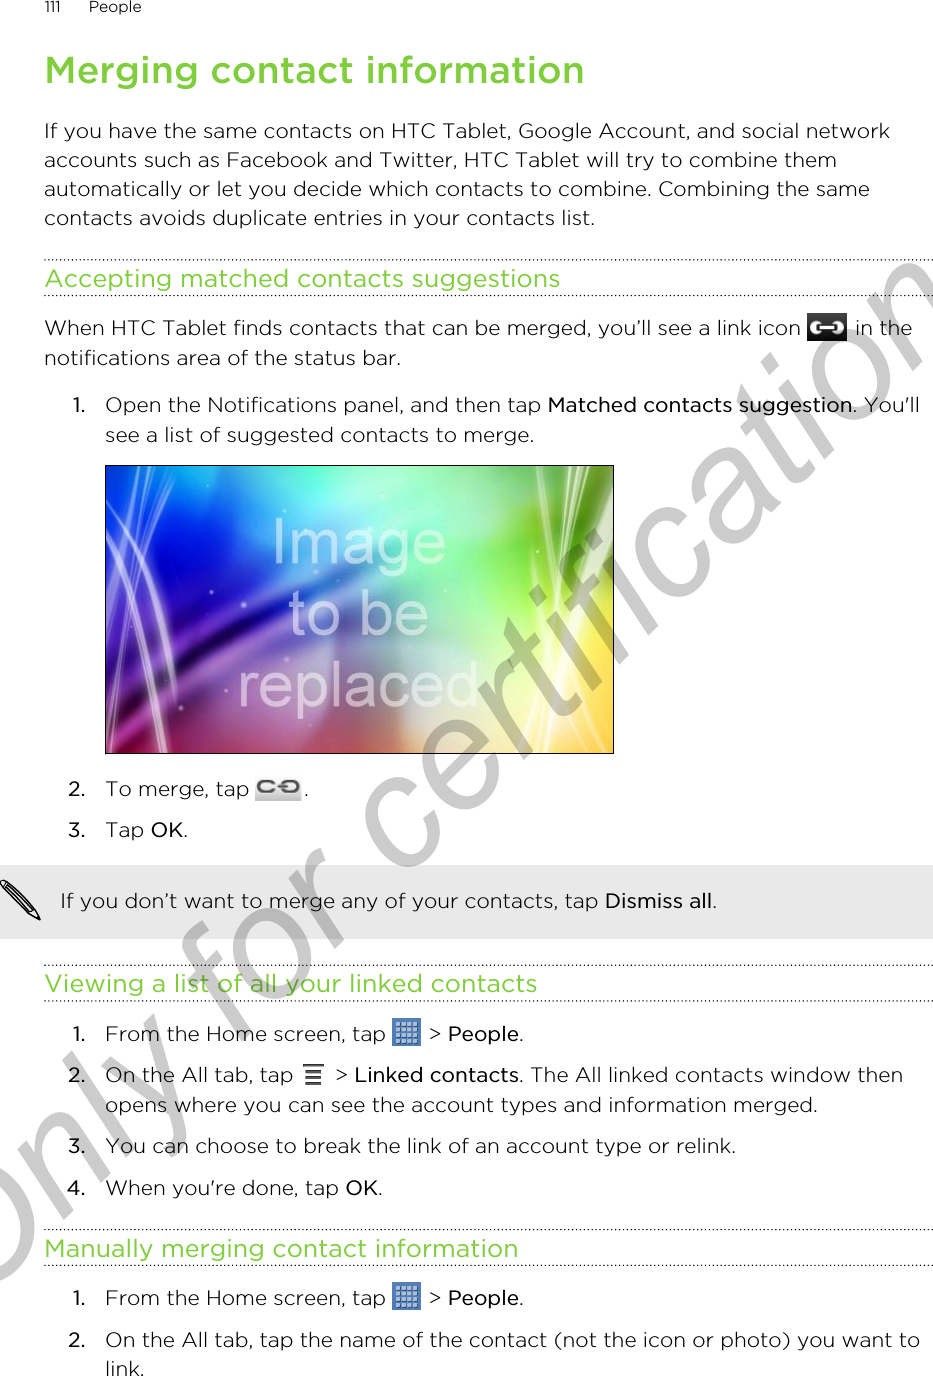 Merging contact informationIf you have the same contacts on HTC Tablet, Google Account, and social networkaccounts such as Facebook and Twitter, HTC Tablet will try to combine themautomatically or let you decide which contacts to combine. Combining the samecontacts avoids duplicate entries in your contacts list.Accepting matched contacts suggestionsWhen HTC Tablet finds contacts that can be merged, you’ll see a link icon   in thenotifications area of the status bar.1. Open the Notifications panel, and then tap Matched contacts suggestion. You&apos;llsee a list of suggested contacts to merge.2. To merge, tap  .3. Tap OK.If you don’t want to merge any of your contacts, tap Dismiss all.Viewing a list of all your linked contacts1. From the Home screen, tap   &gt; People.2. On the All tab, tap   &gt; Linked contacts. The All linked contacts window thenopens where you can see the account types and information merged.3. You can choose to break the link of an account type or relink.4. When you&apos;re done, tap OK.Manually merging contact information1. From the Home screen, tap   &gt; People.2. On the All tab, tap the name of the contact (not the icon or photo) you want tolink.111 PeopleOnly for certification